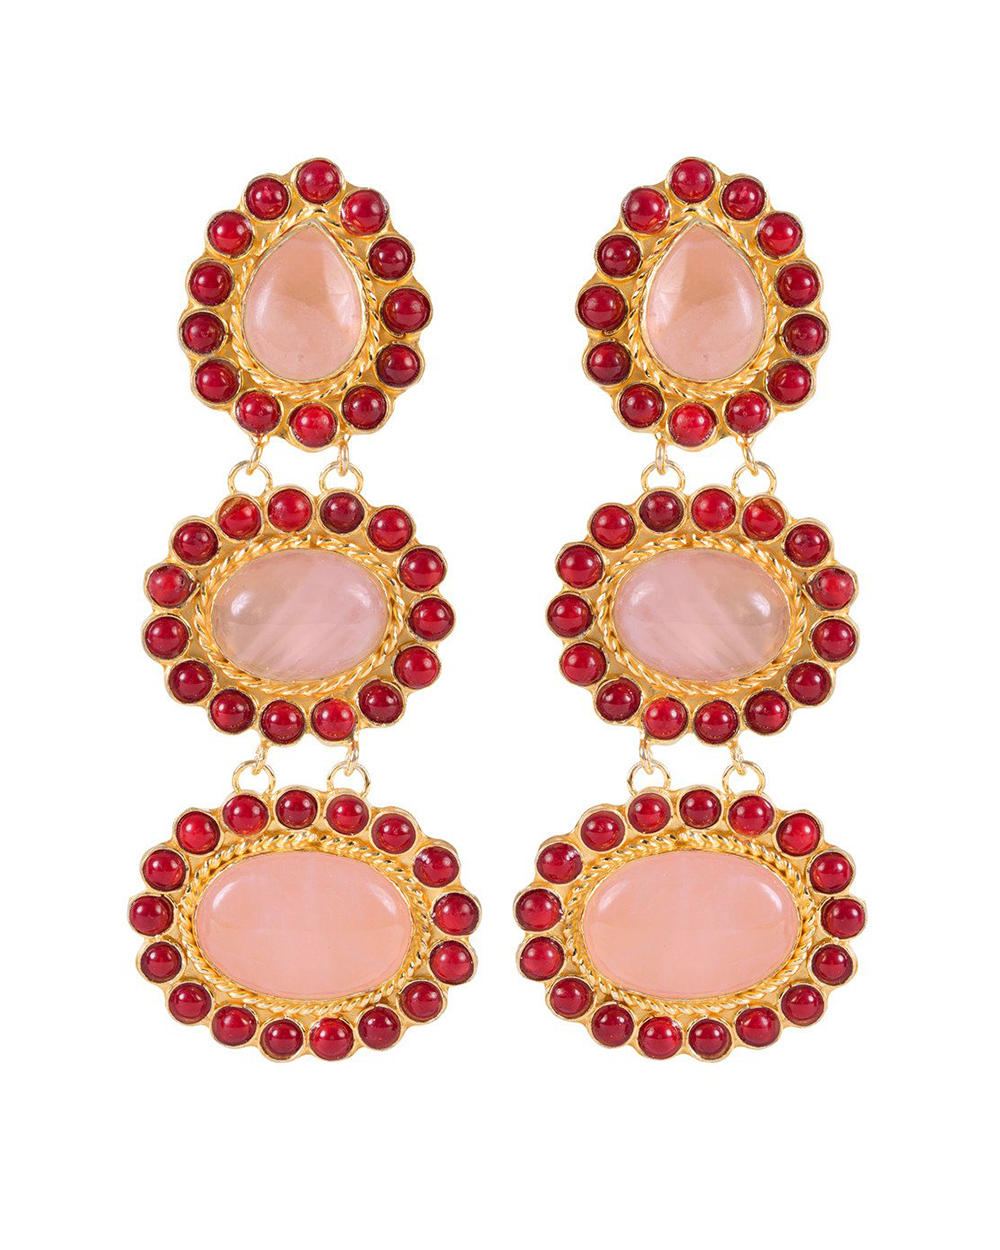 Christie Nicolaides earrings, $288